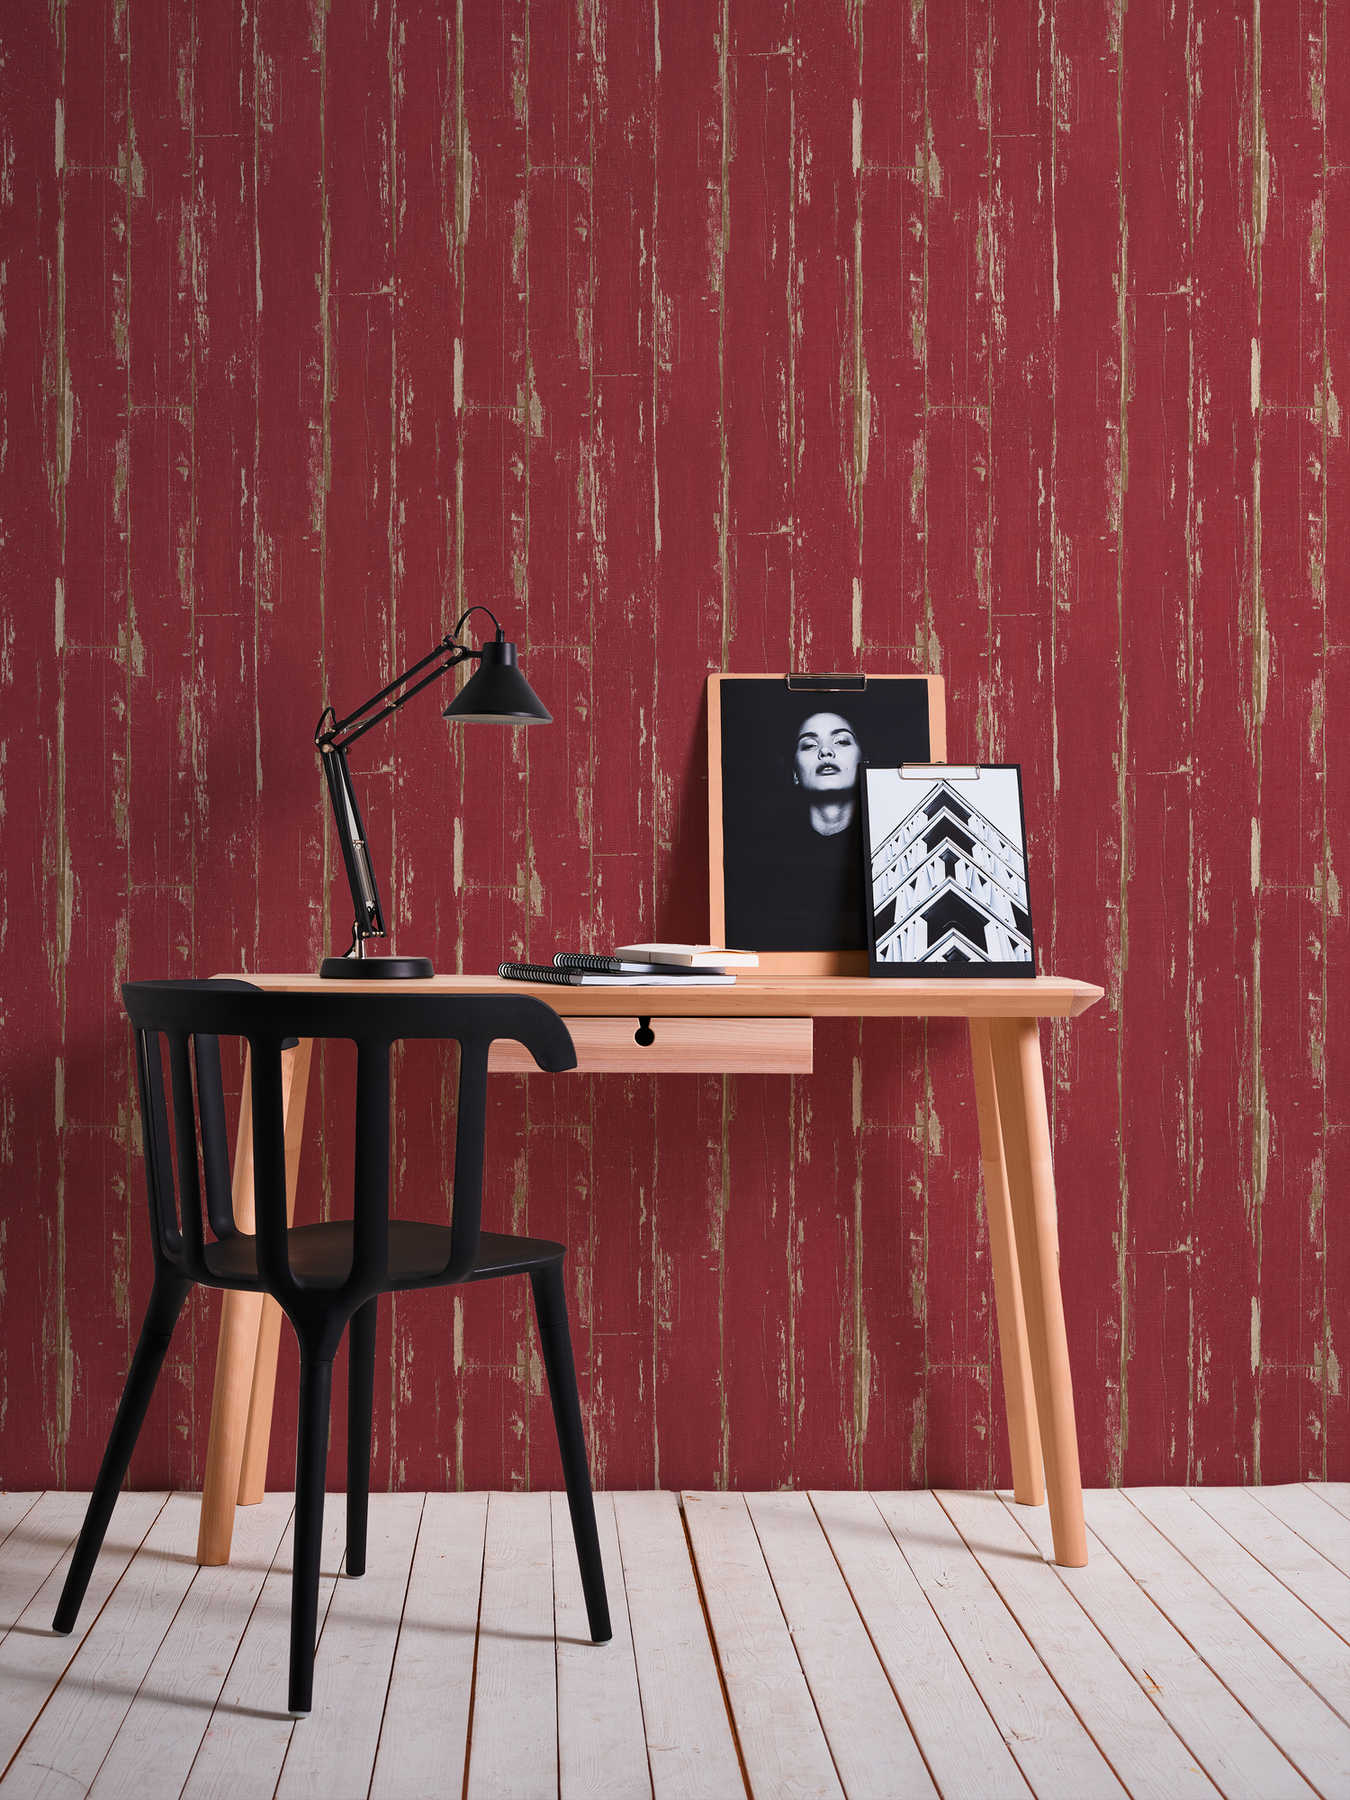             Wooden wallpaper with boards, vintage look & used look - red
        